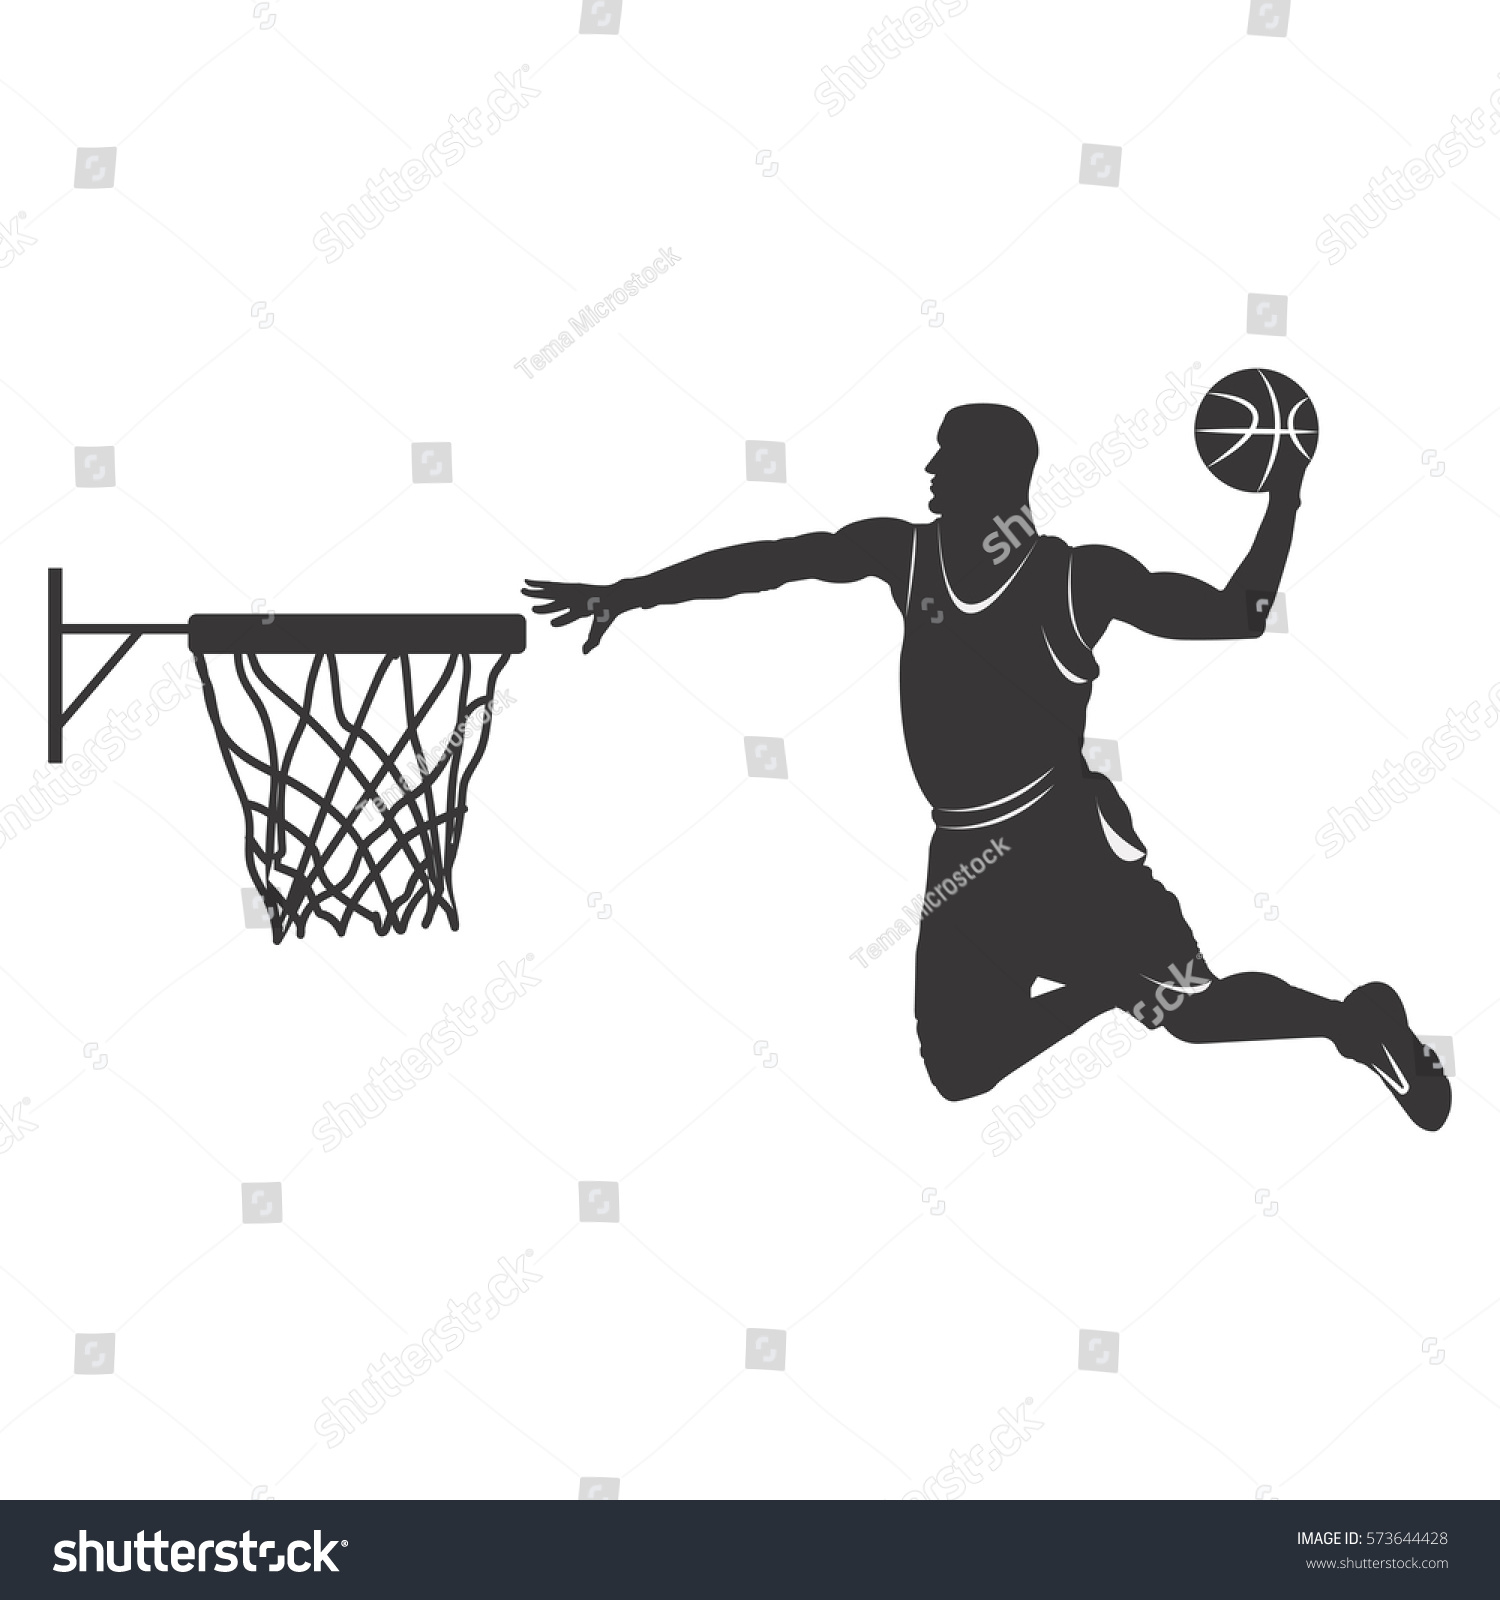 Basketball Player Vector Silhouette Isolated On Stock Vector (Royalty ...